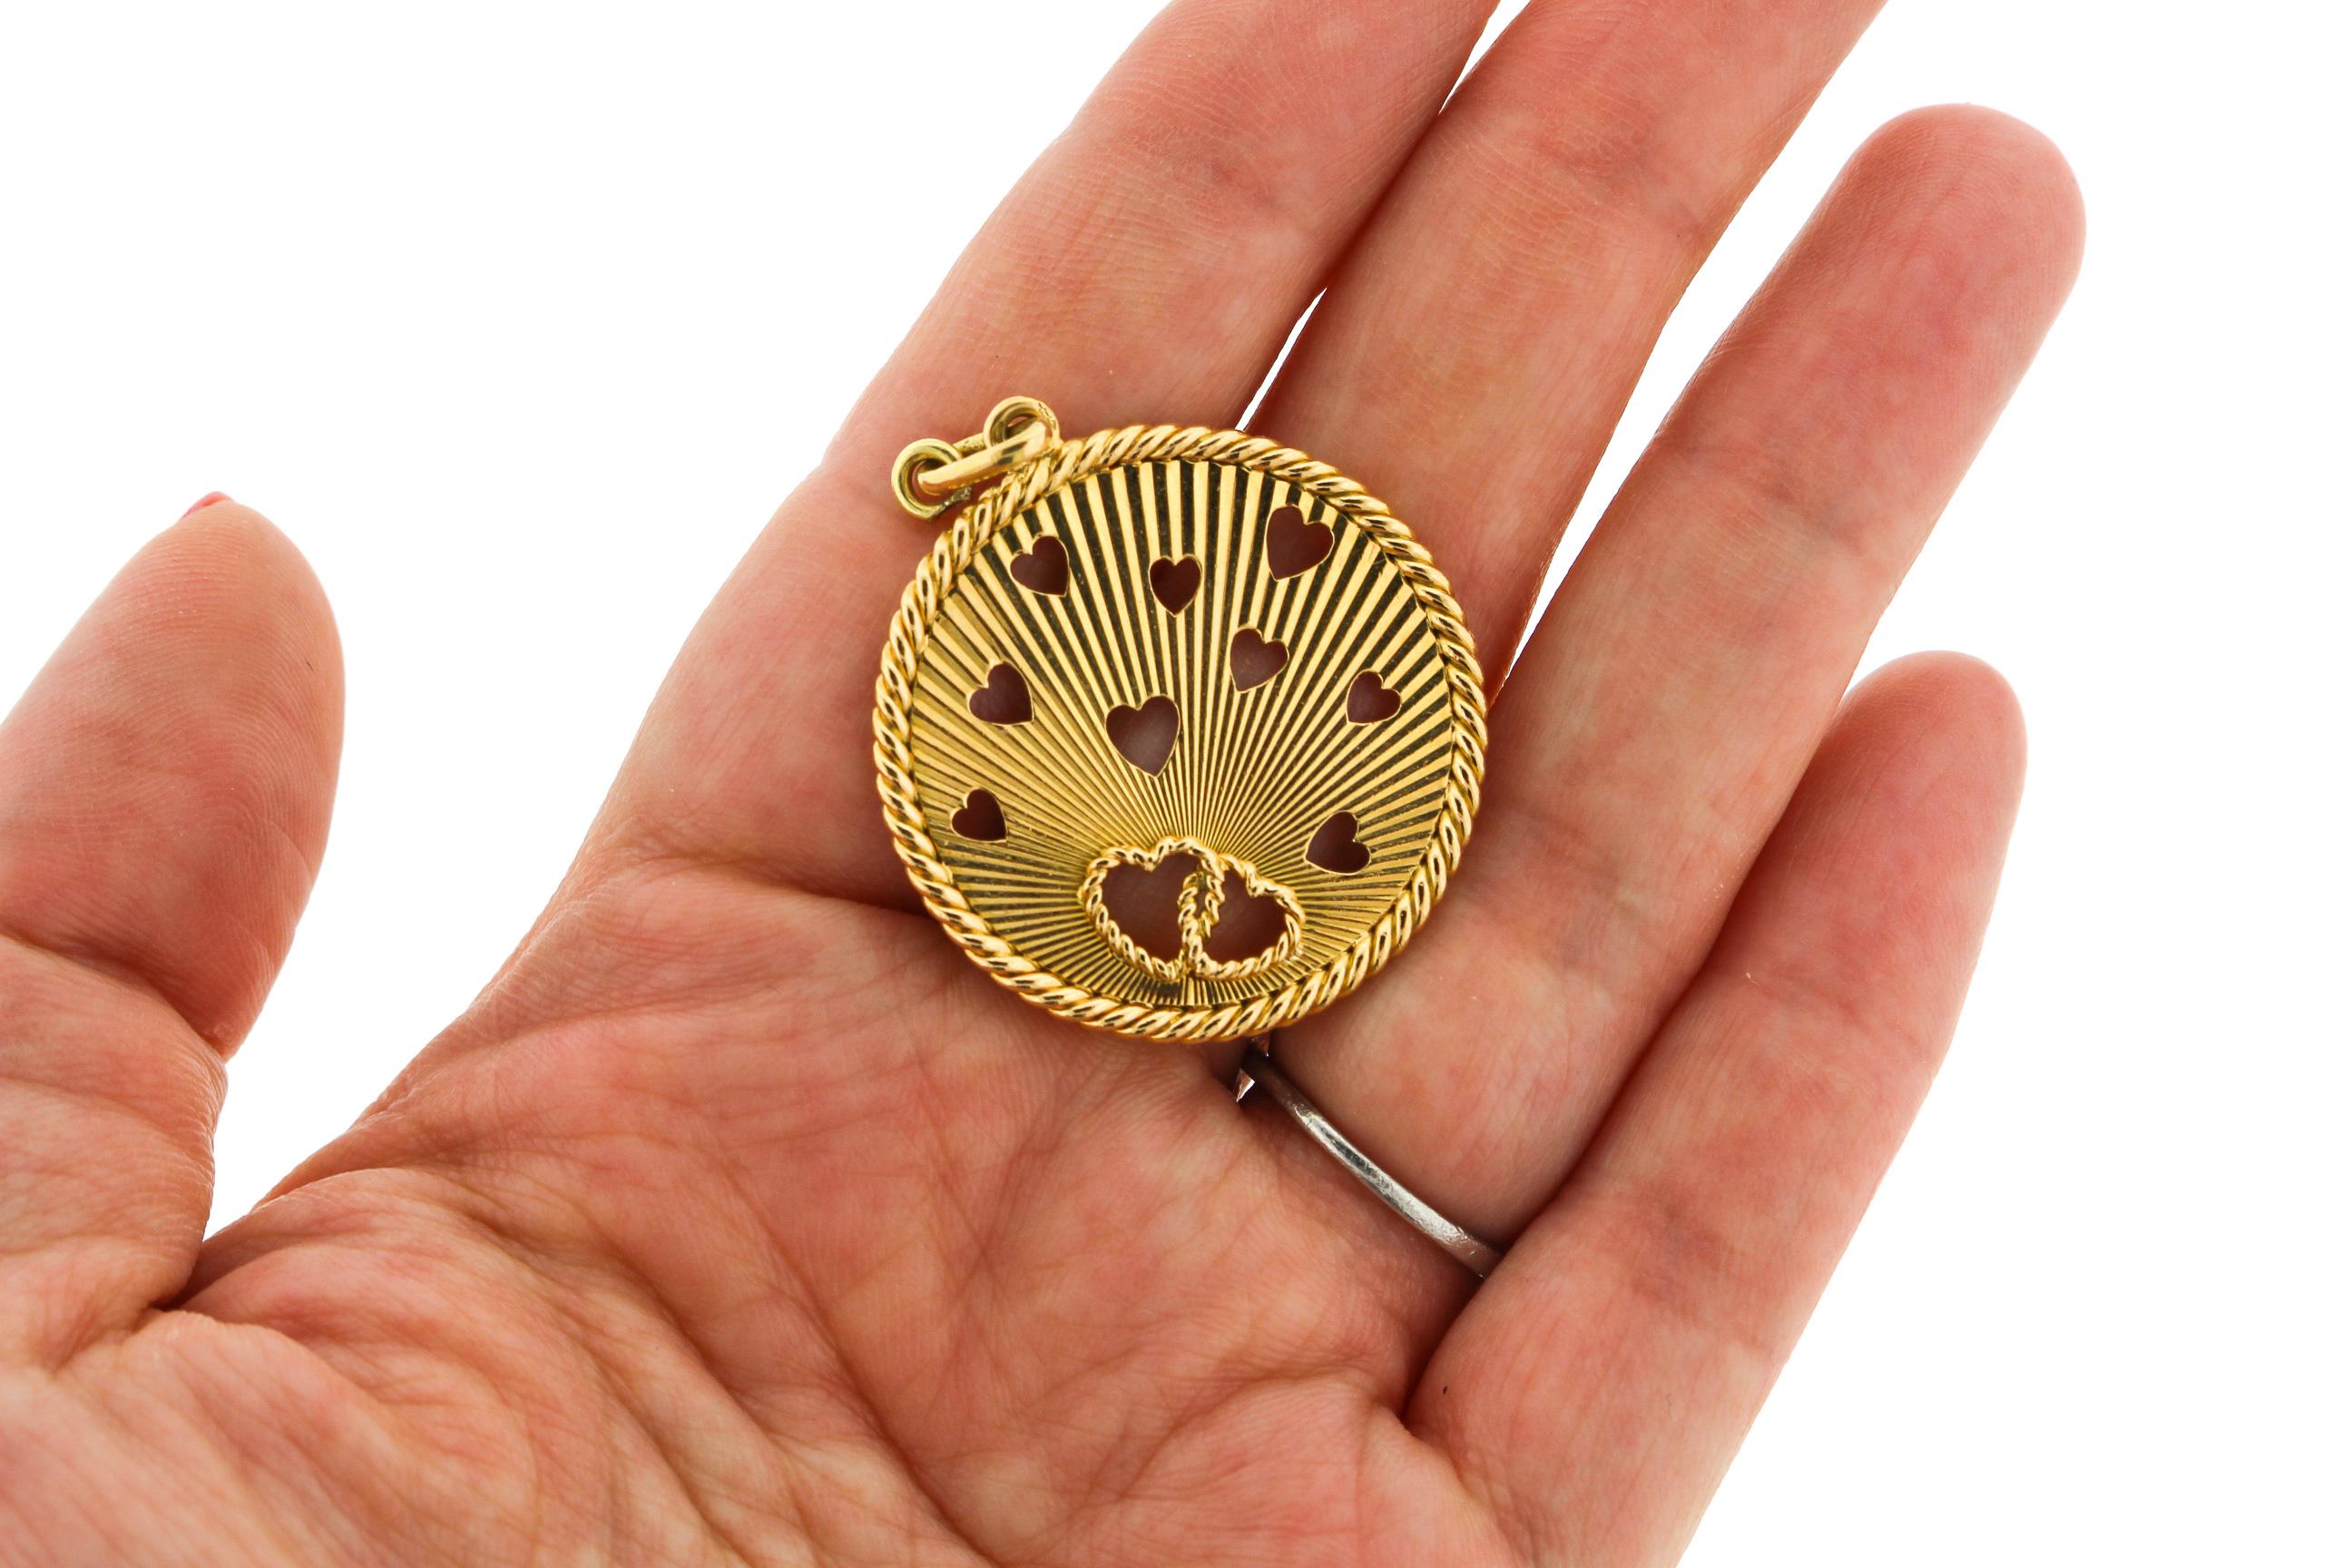 Mid-Century Modern 18k yellow gold heart charm pendant made in France around 1965. The charm which has fluted gold details with cut out hearts and a twisted gold rim is sheer whimsy. The ultimate love token. The charm has French hallmarks for 18k